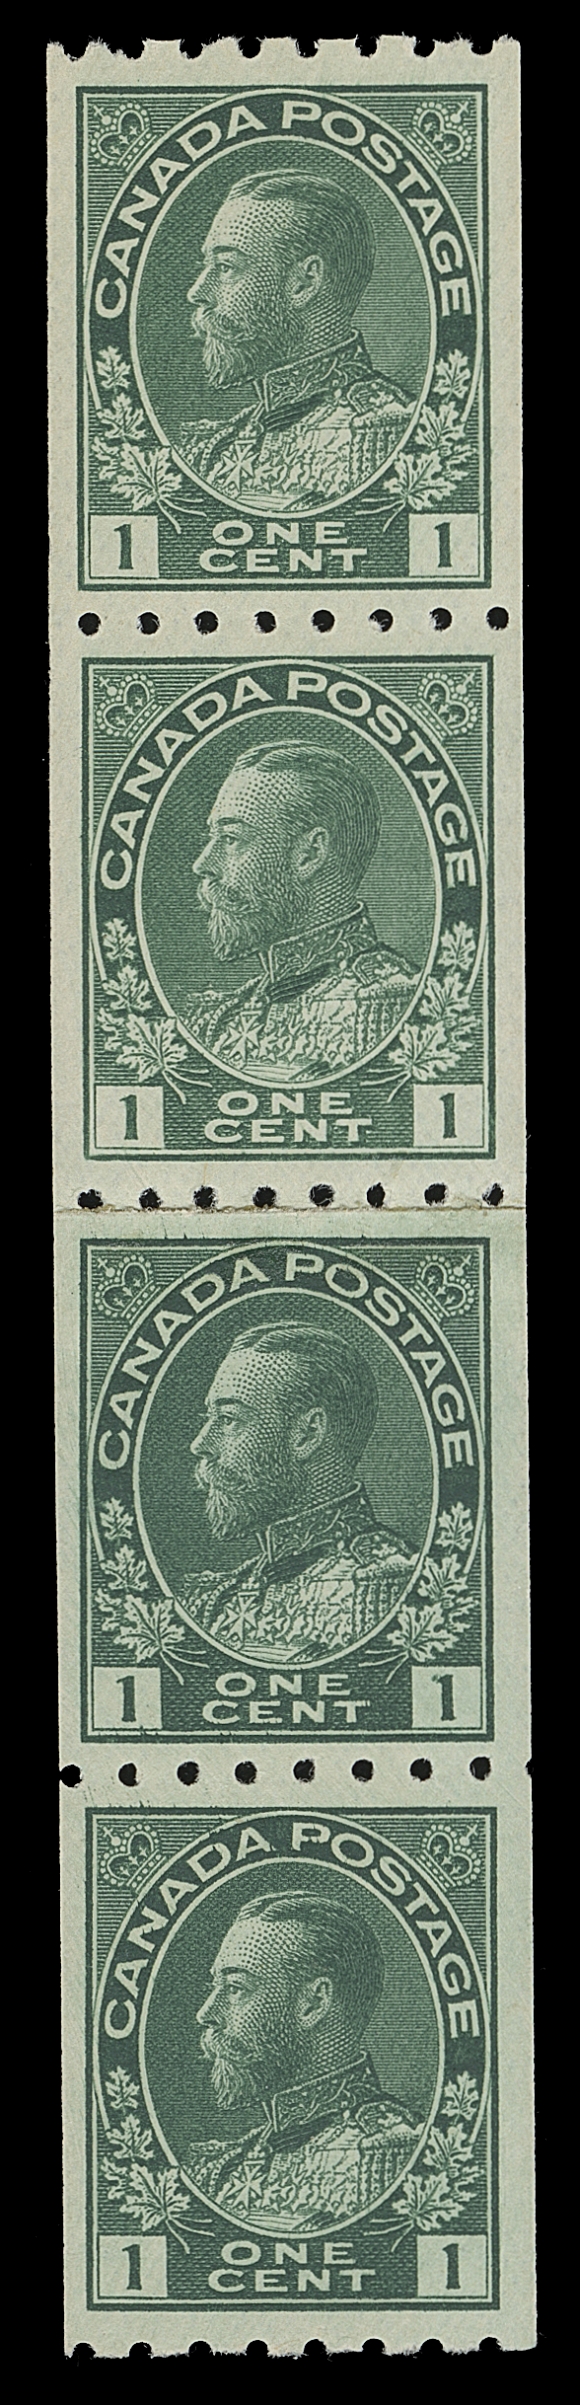 CANADA  123i shade,A remarkable mint paste-up coil strip of four consisting of two coil pairs in markedly different shades, superbly centered with the central paste-up pair being NH. A rarely seen variety, XF LH